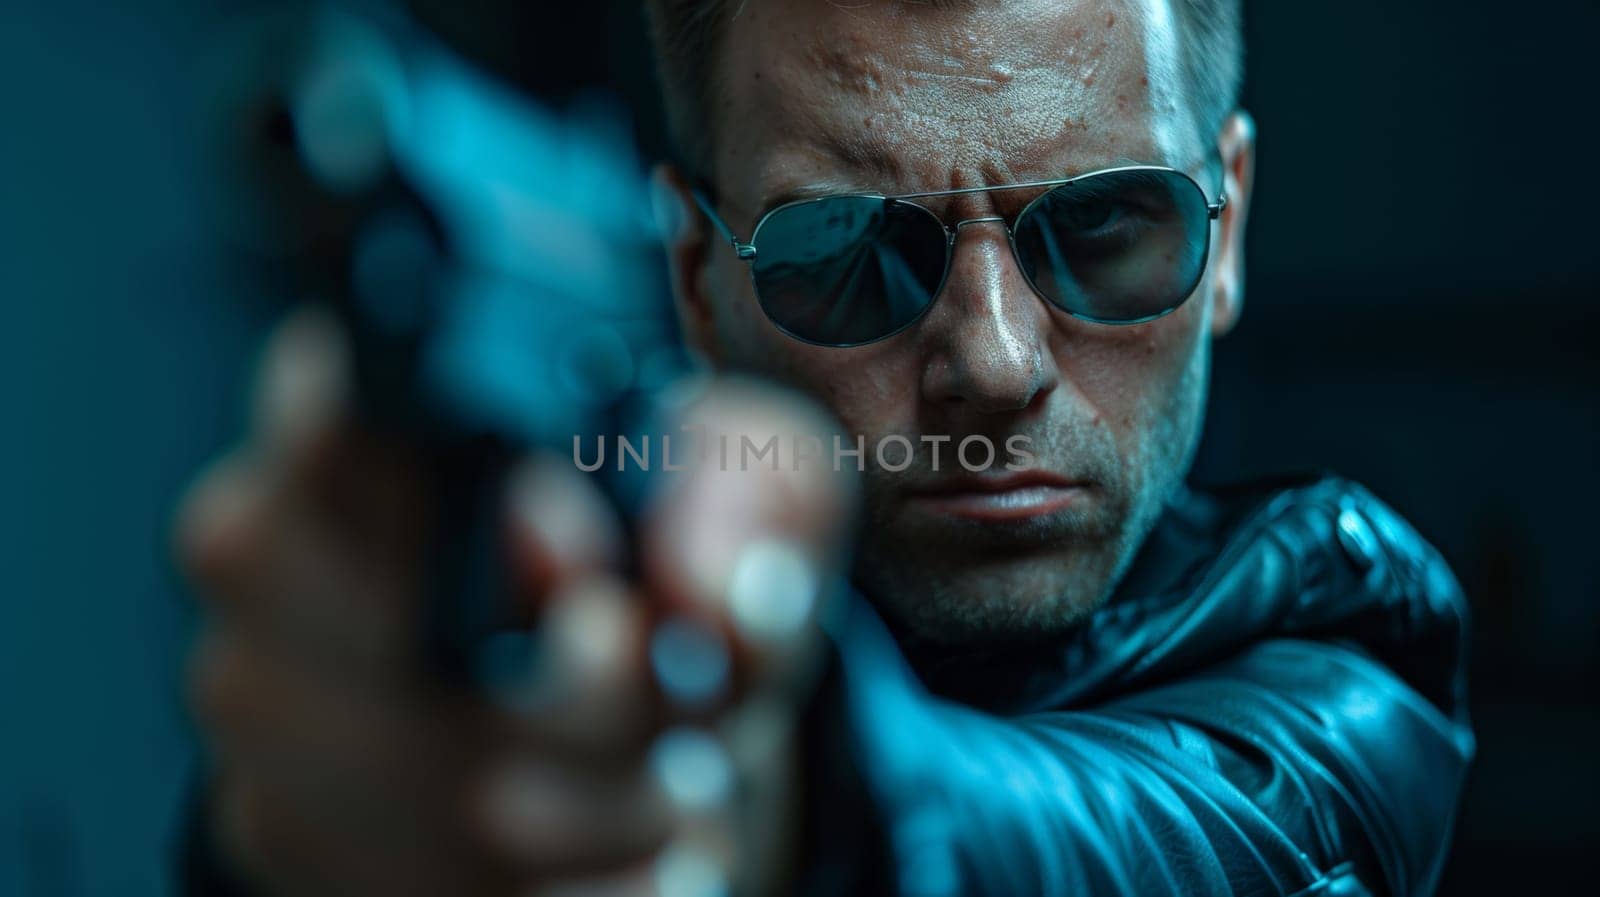 A man in sunglasses and leather jacket aiming a gun